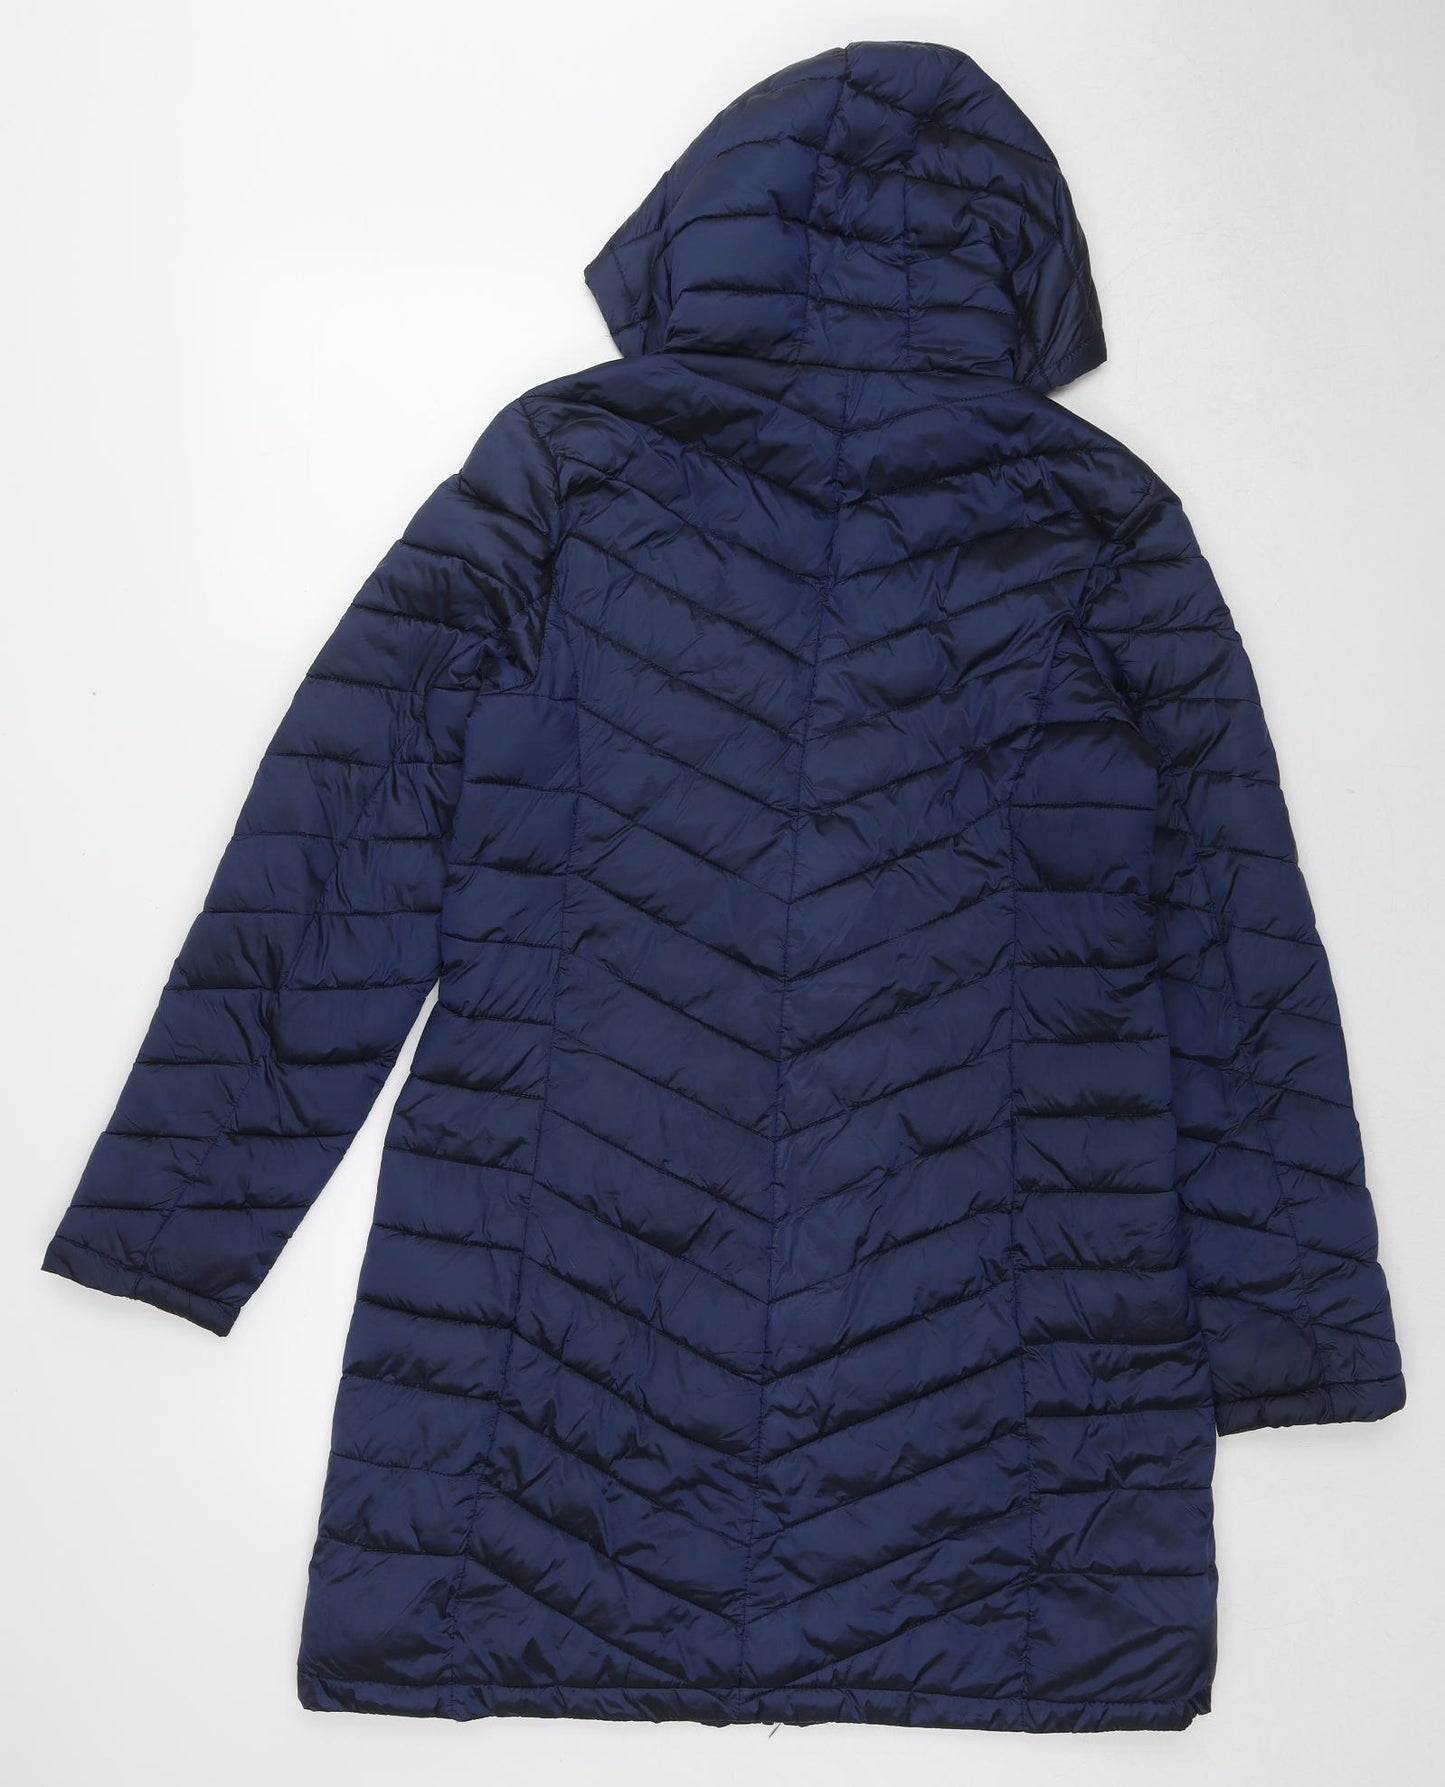 Northen Expo Womens Blue Quilted Coat Size 12 Zip - Size 12-14